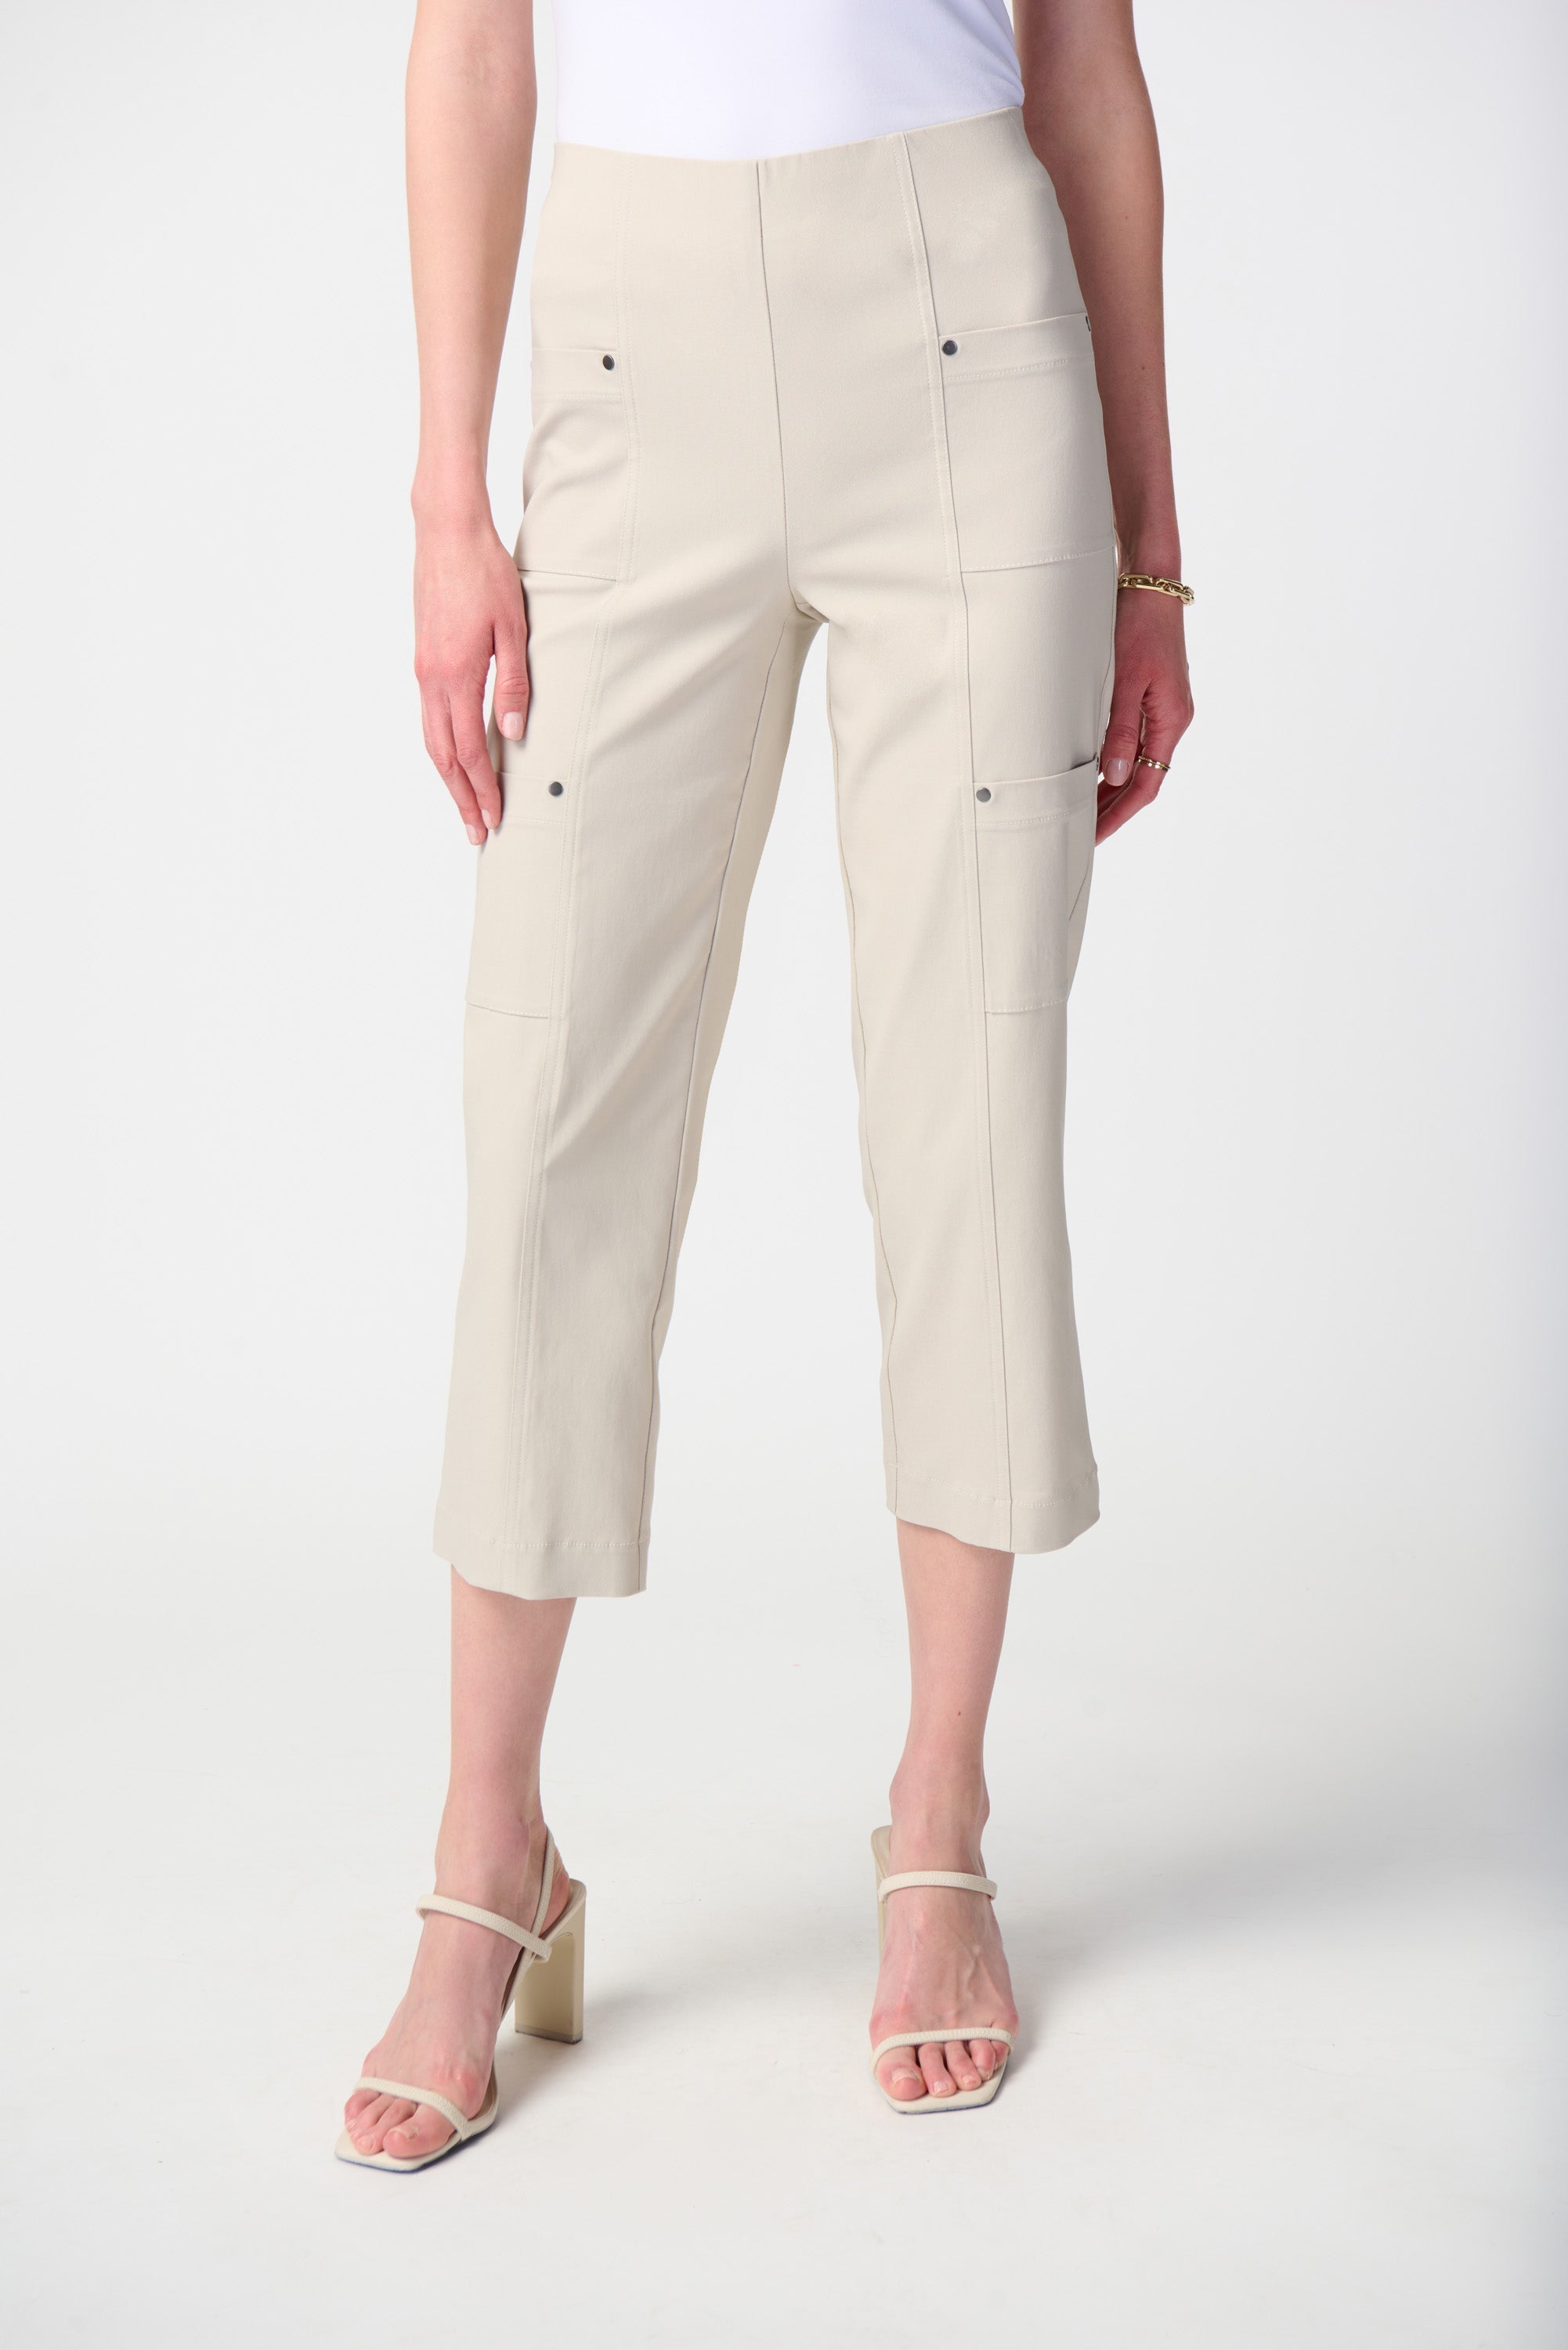 Joseph Ribkoff (241163) Women's Millennium Cropped Pull On Pants With Patch Pockets in Moonstone Beige